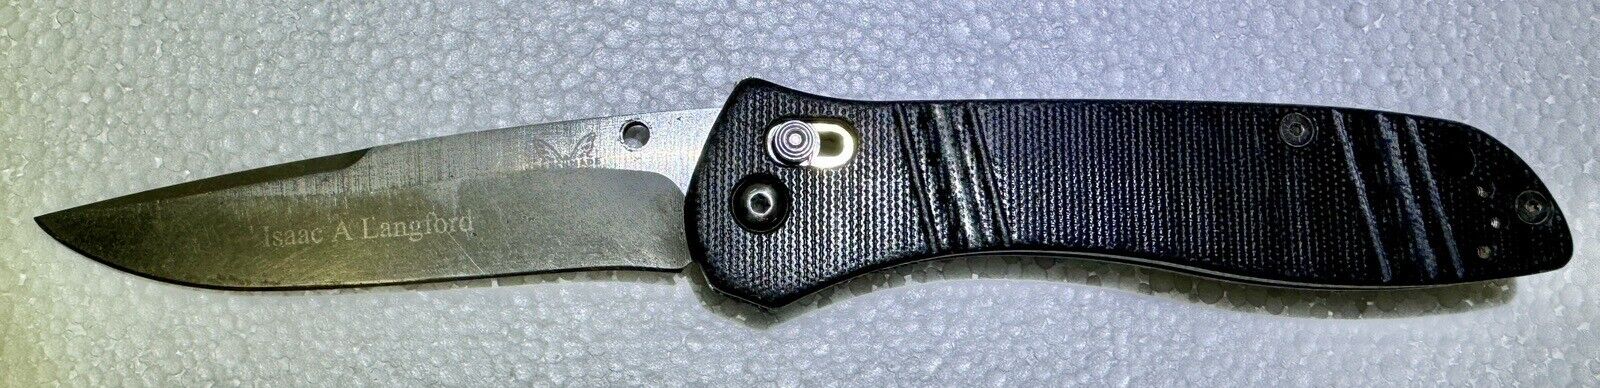 Benchmade McHenry & Williams 710 G10 Axis Lock w/ D2 3.9